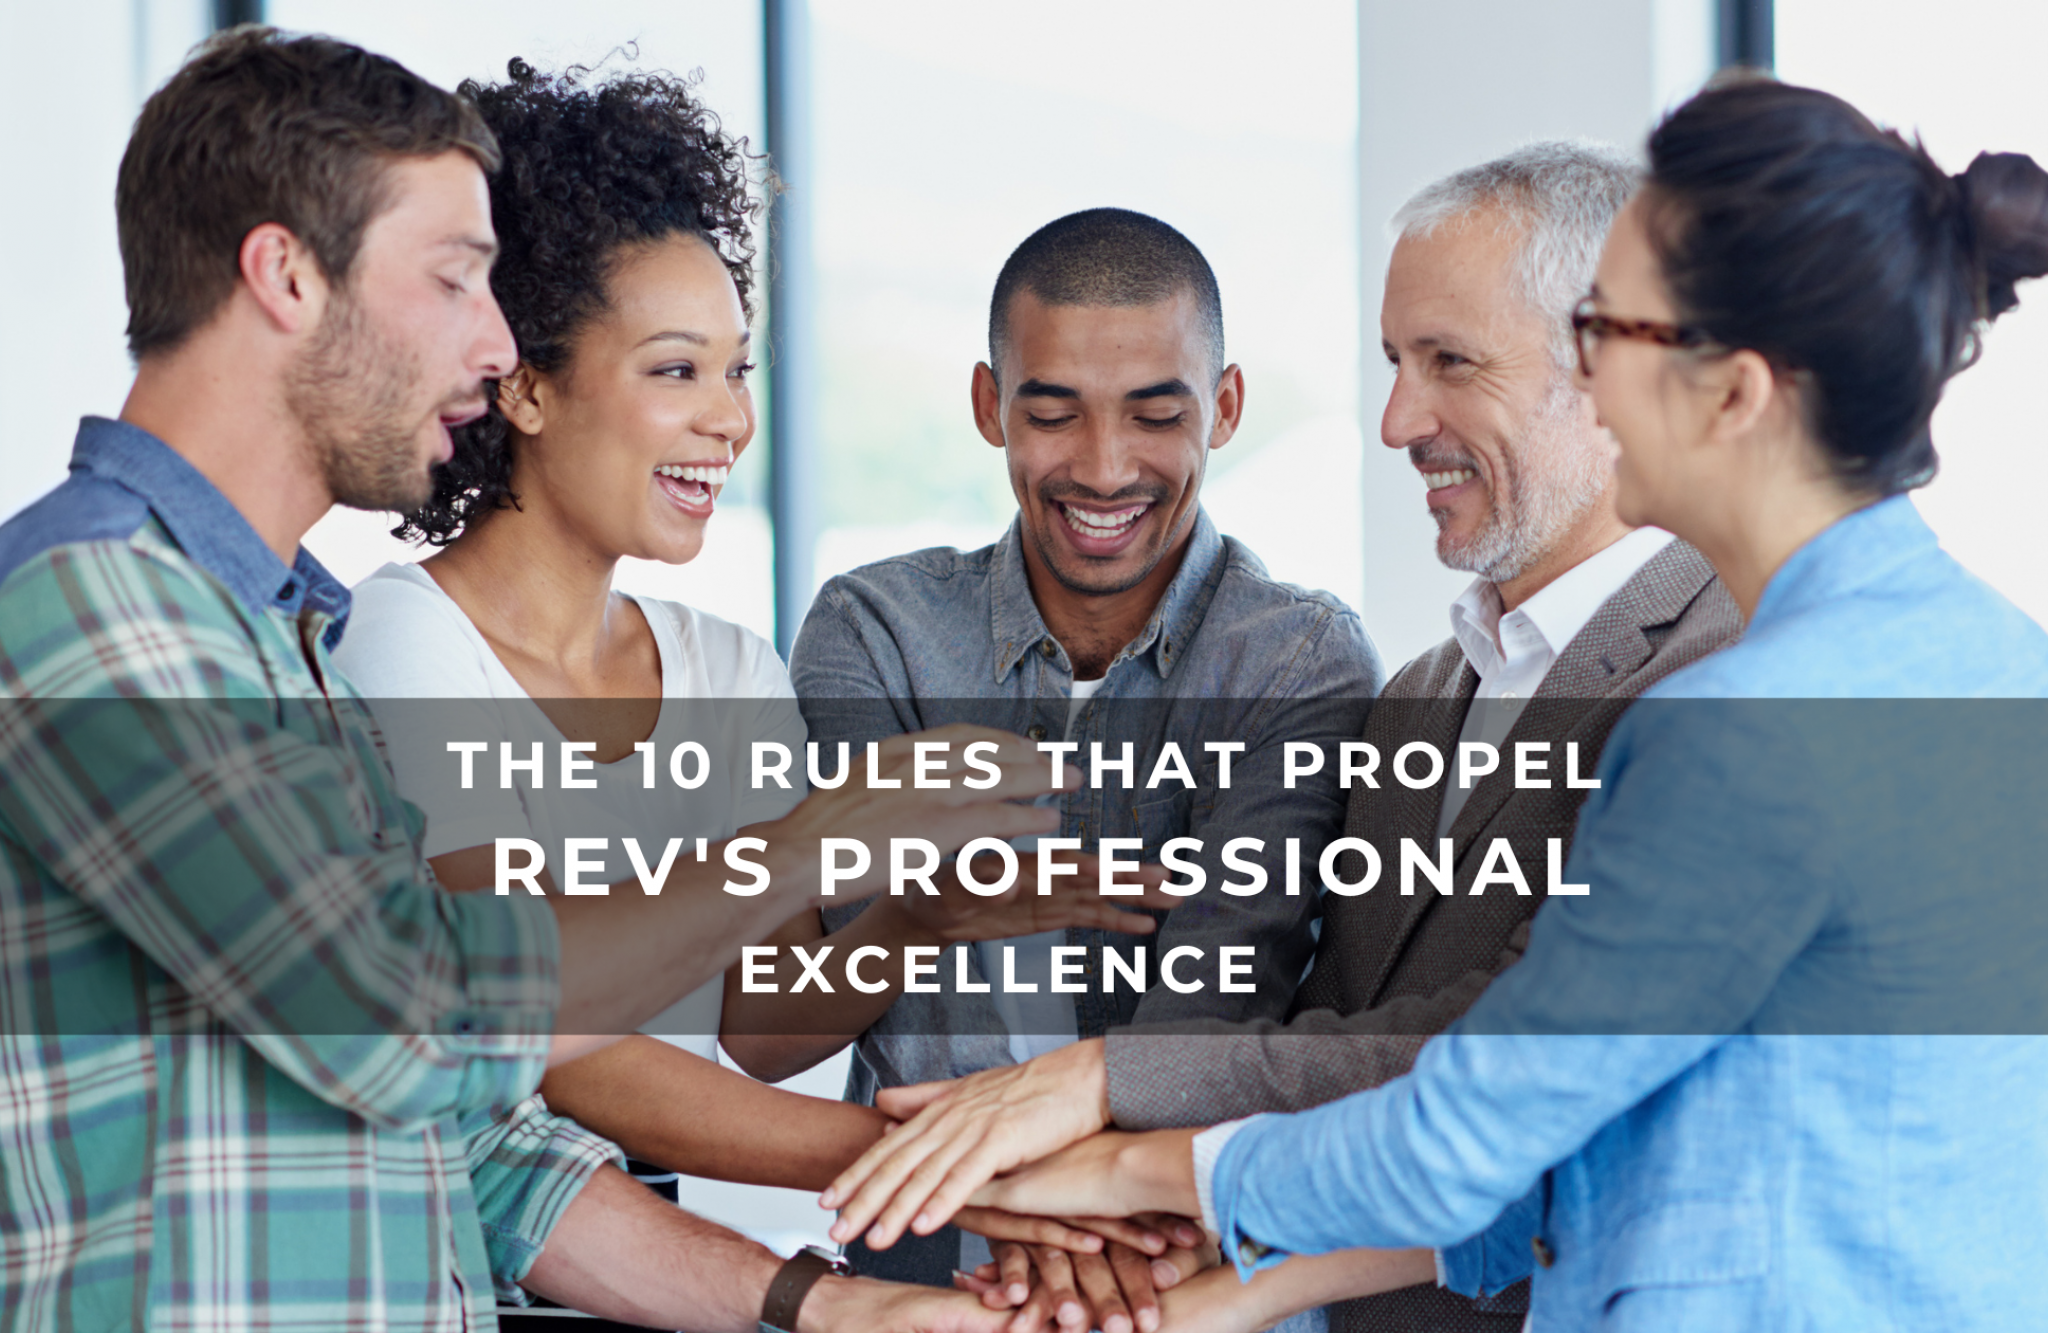 REV's Professional Excellence